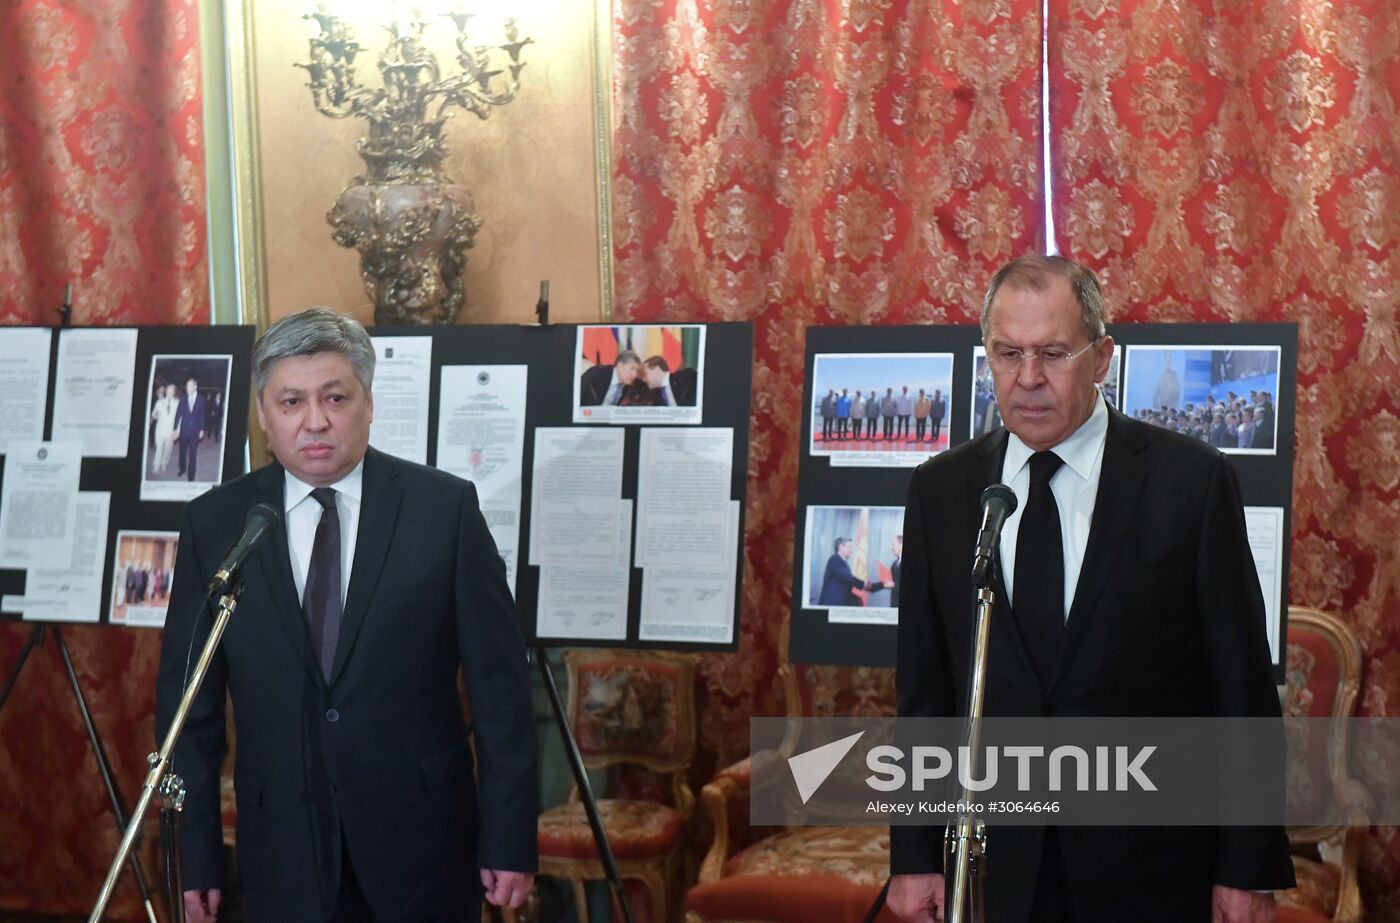 Sergei Lavrov meets with Kyrgyzstan's Foreign Minister Erlan Abdyldayev